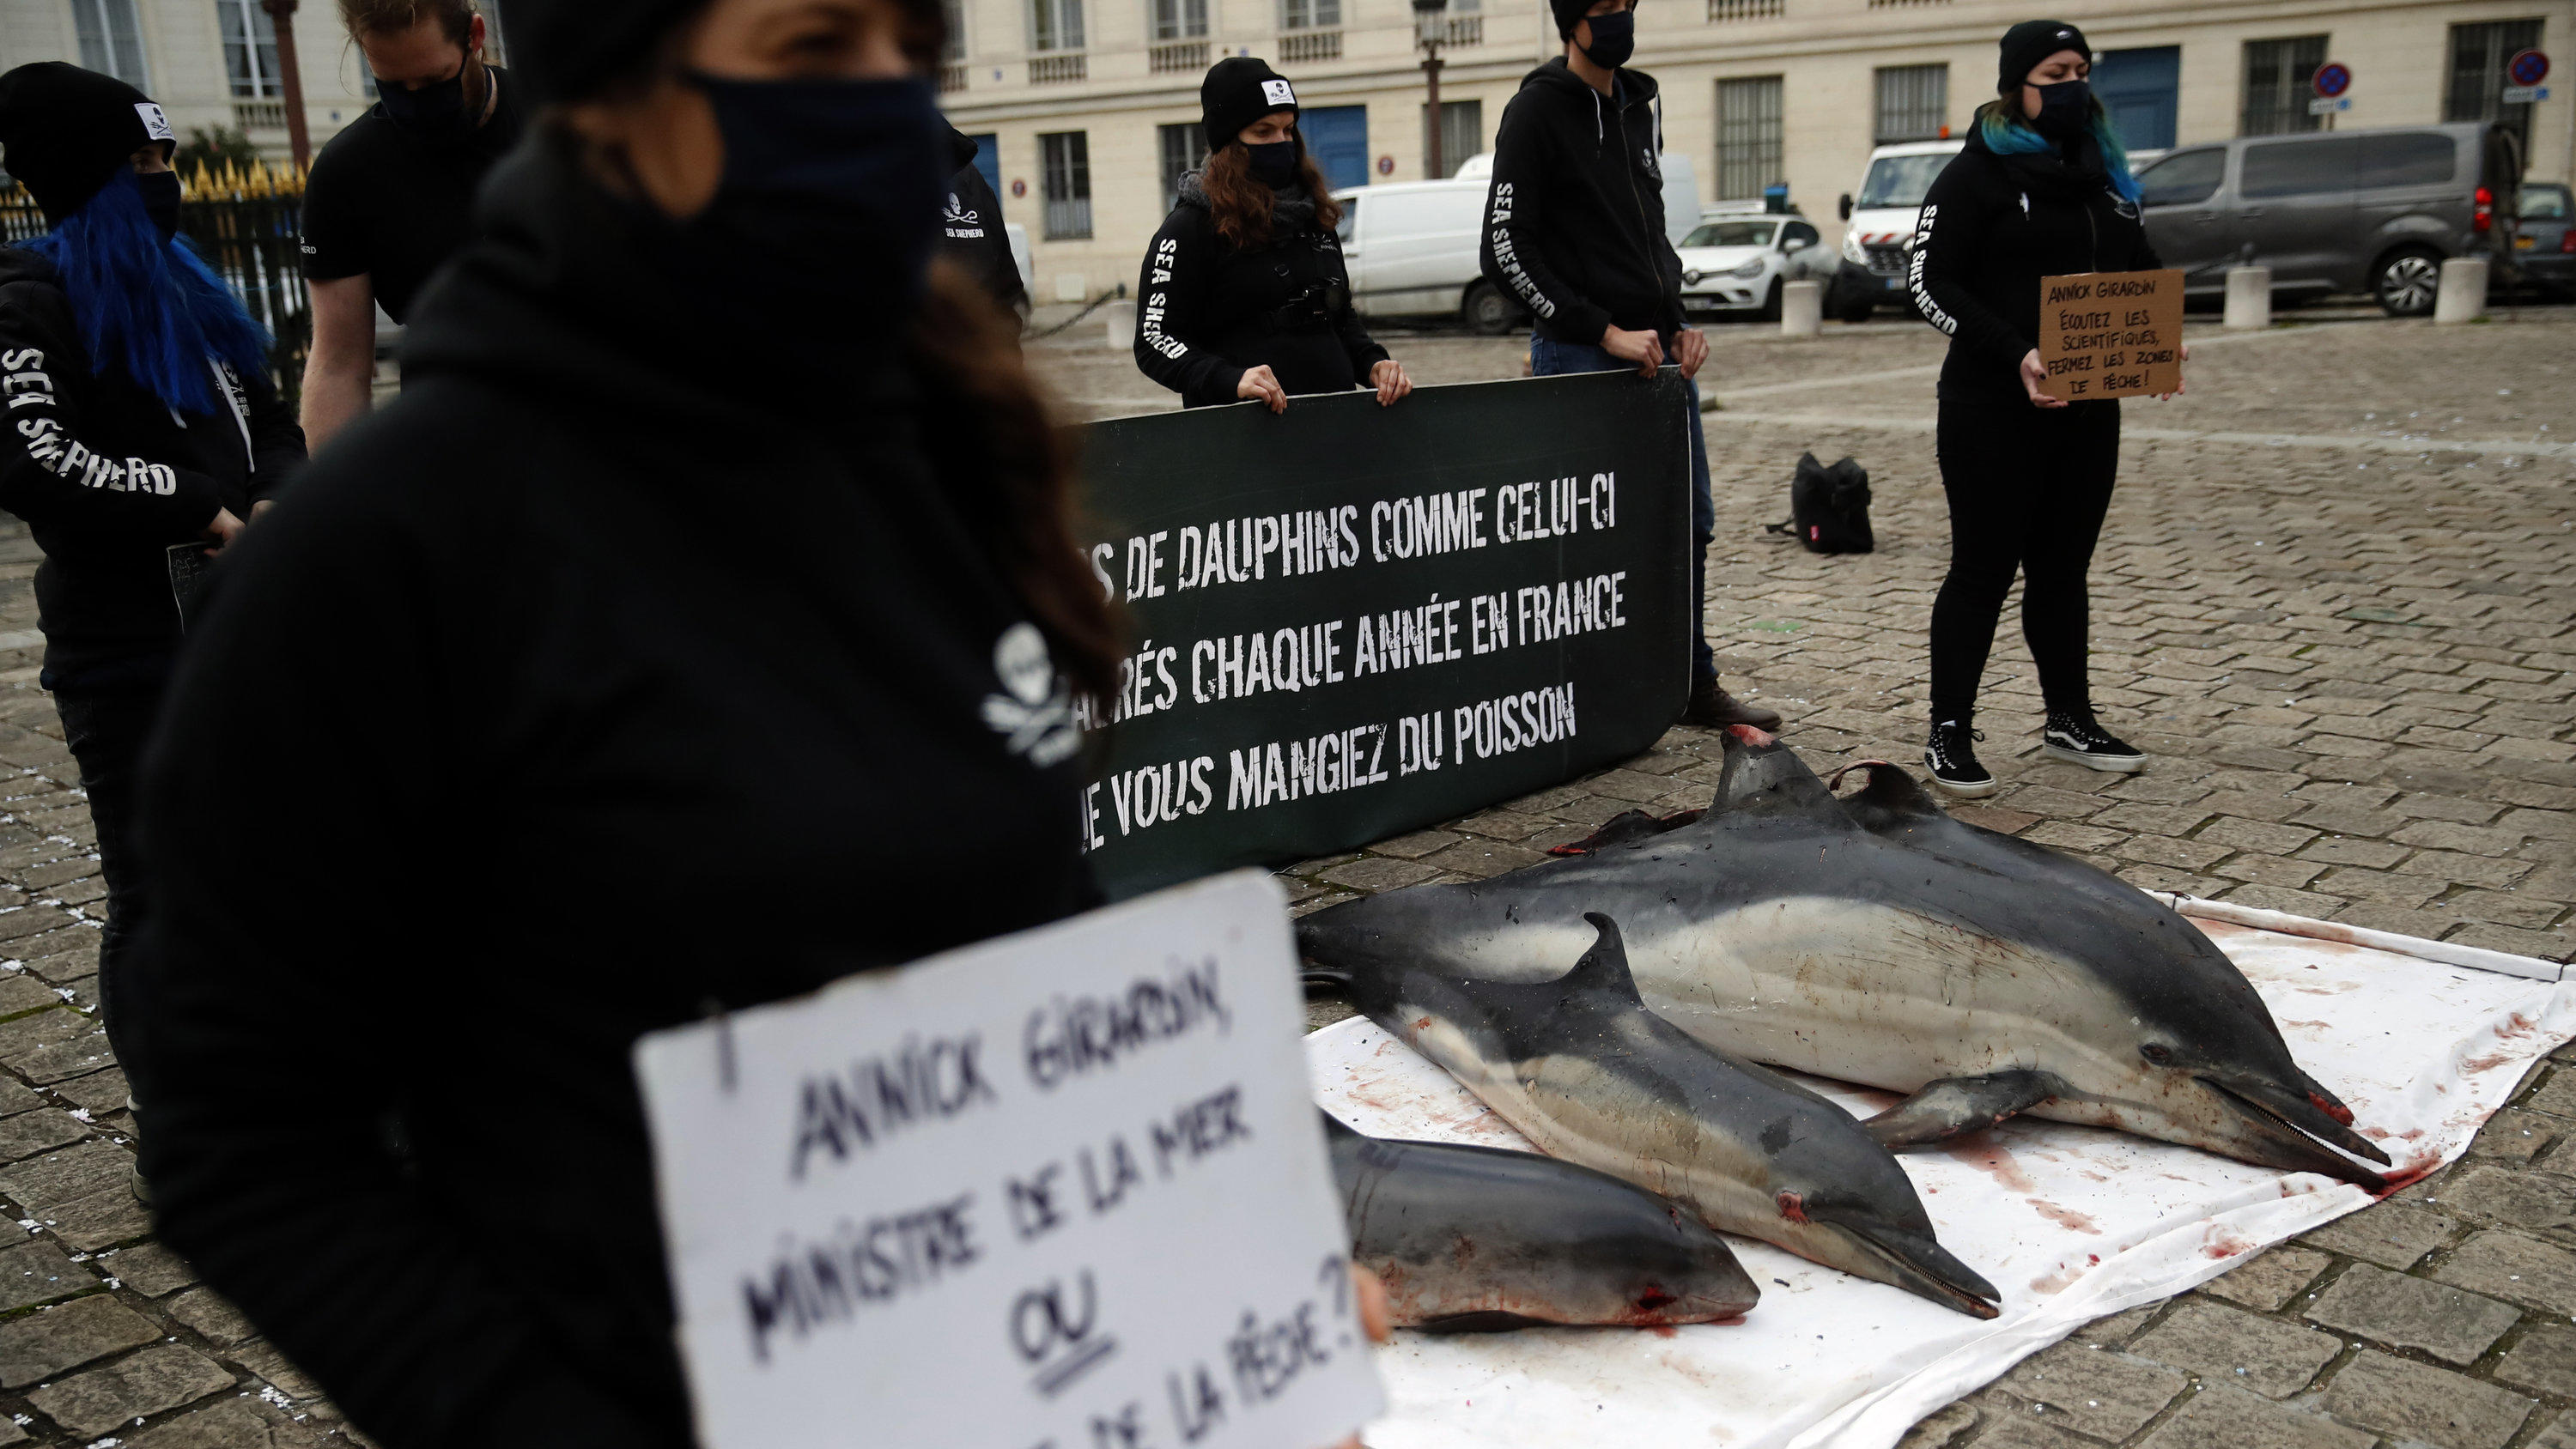 Activists stand by four dead dolphins they spread on the cobblestones outside France's parliament, in Paris, Tuesday Feb. 2, 2021 to urge safer fishing industry practices to protect dolphins from fatal encounters with fishing nets. The banner reads "